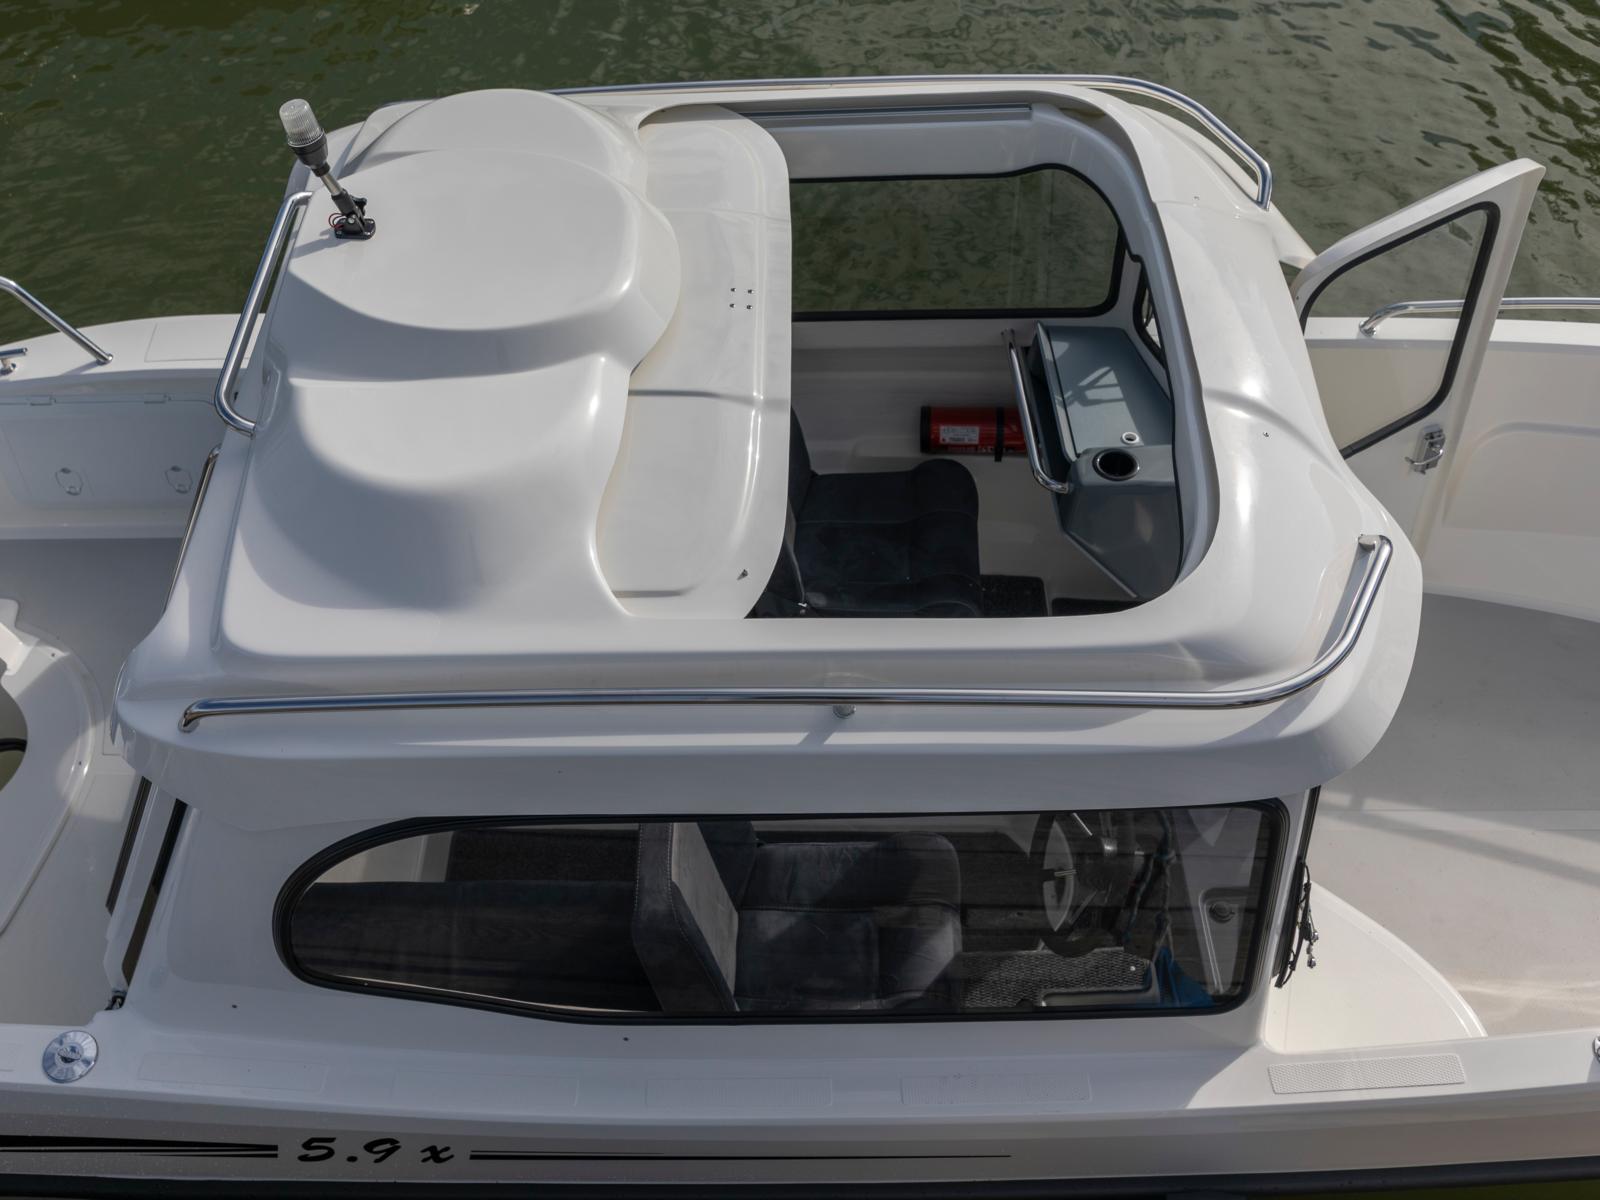 TG 5.9 | Boat Solutions, Utting am Ammersee